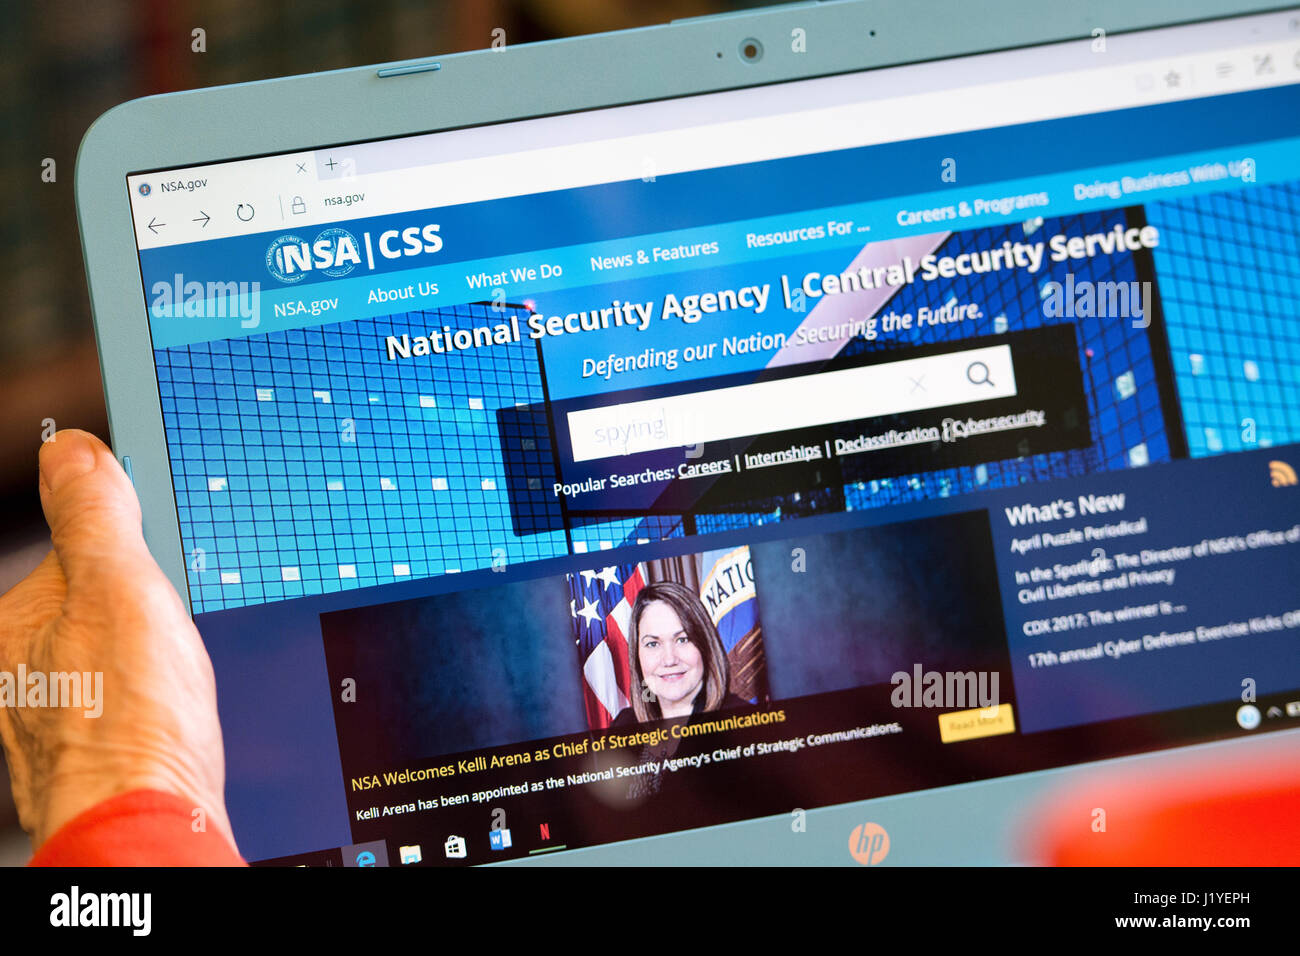 NSA National Security Agency, Central Security Service Website Bildschirm Stockfoto